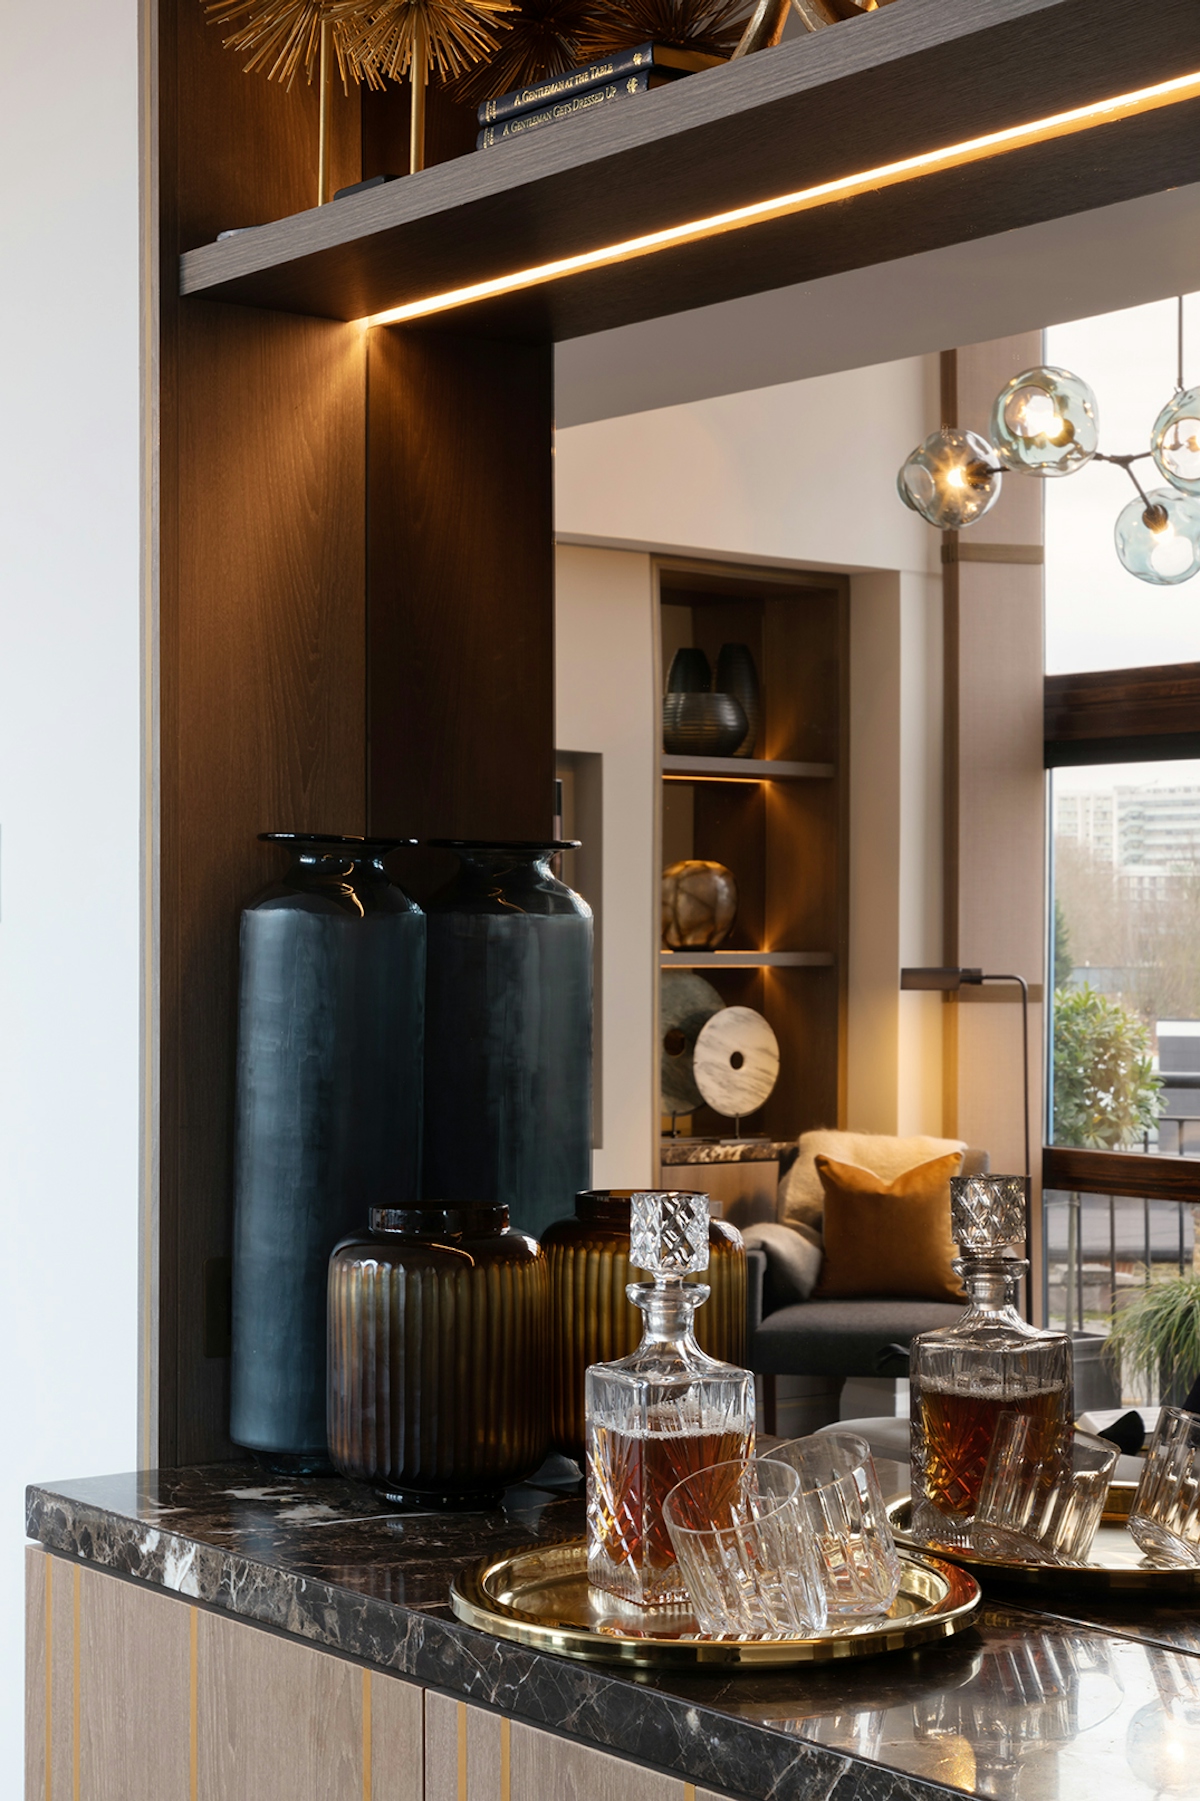 Luxury home bar featuring crystal decanter and elegant vases | LuxDeco.com